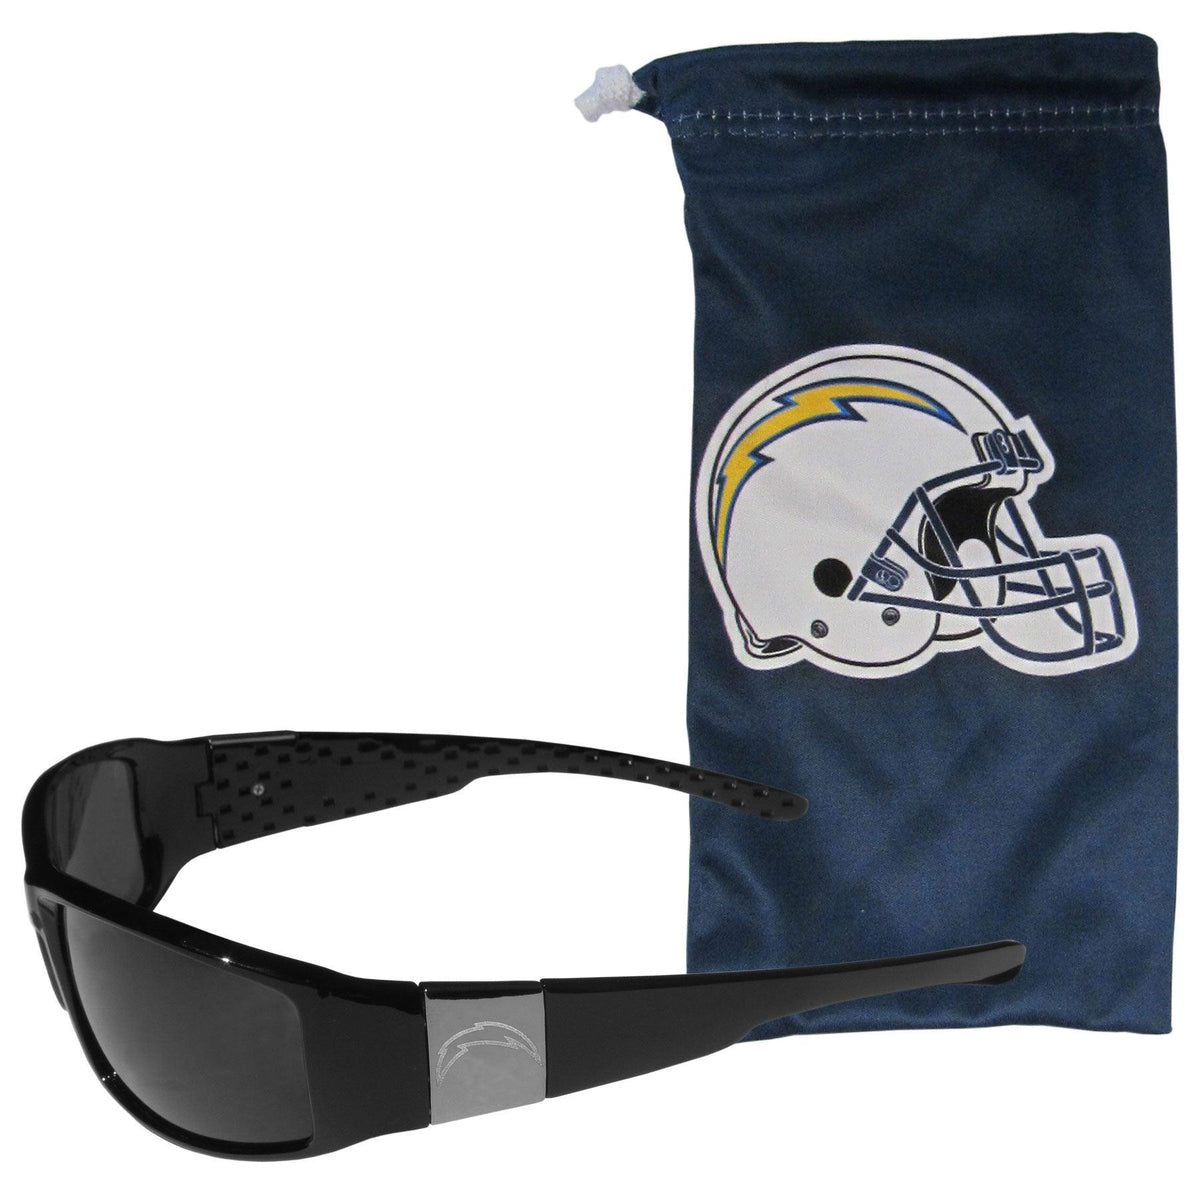 Los Angeles Chargers Etched Chrome Wrap Sunglasses and Bag - Flyclothing LLC